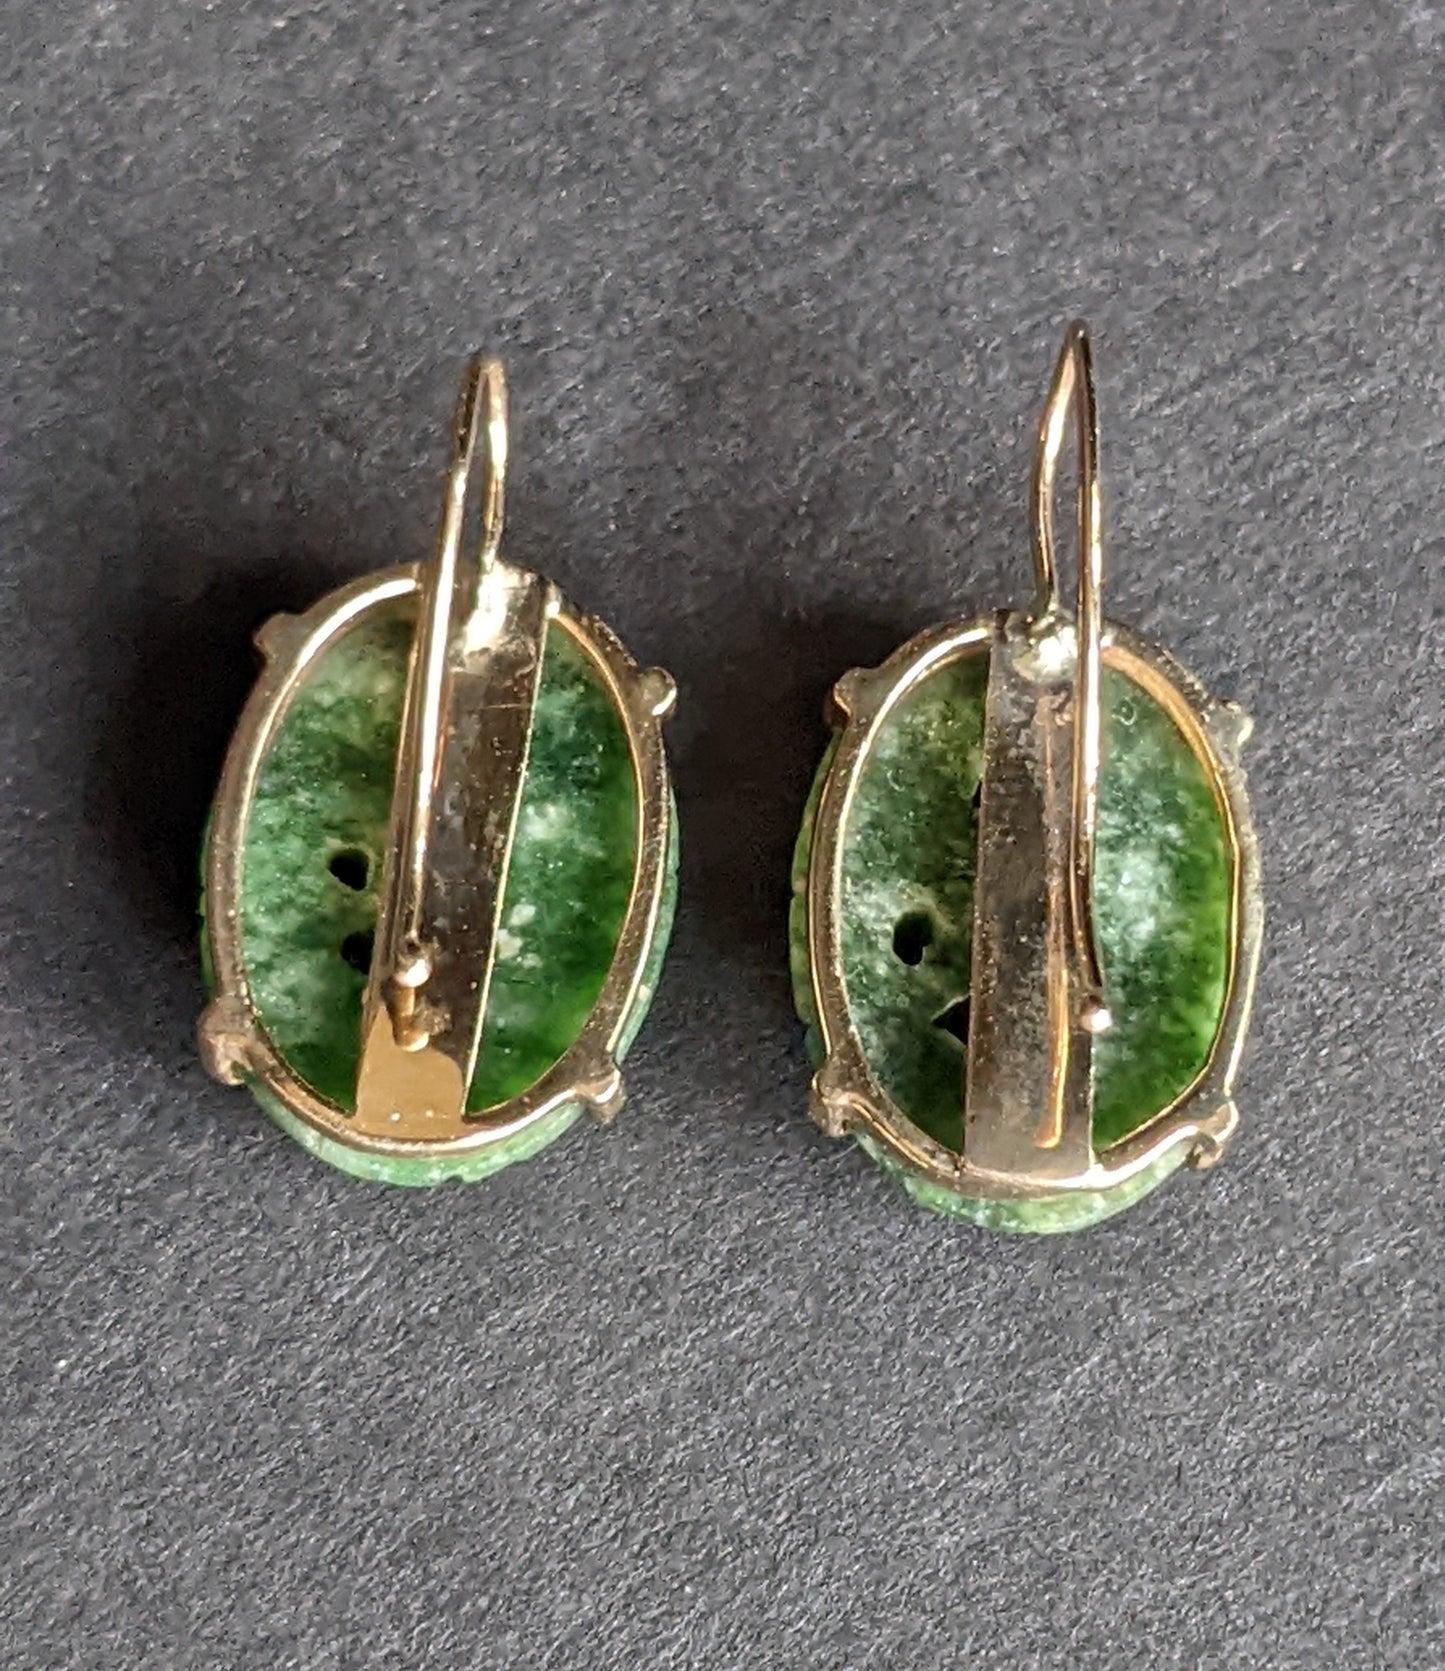 Carved Jade and 14kt earrings